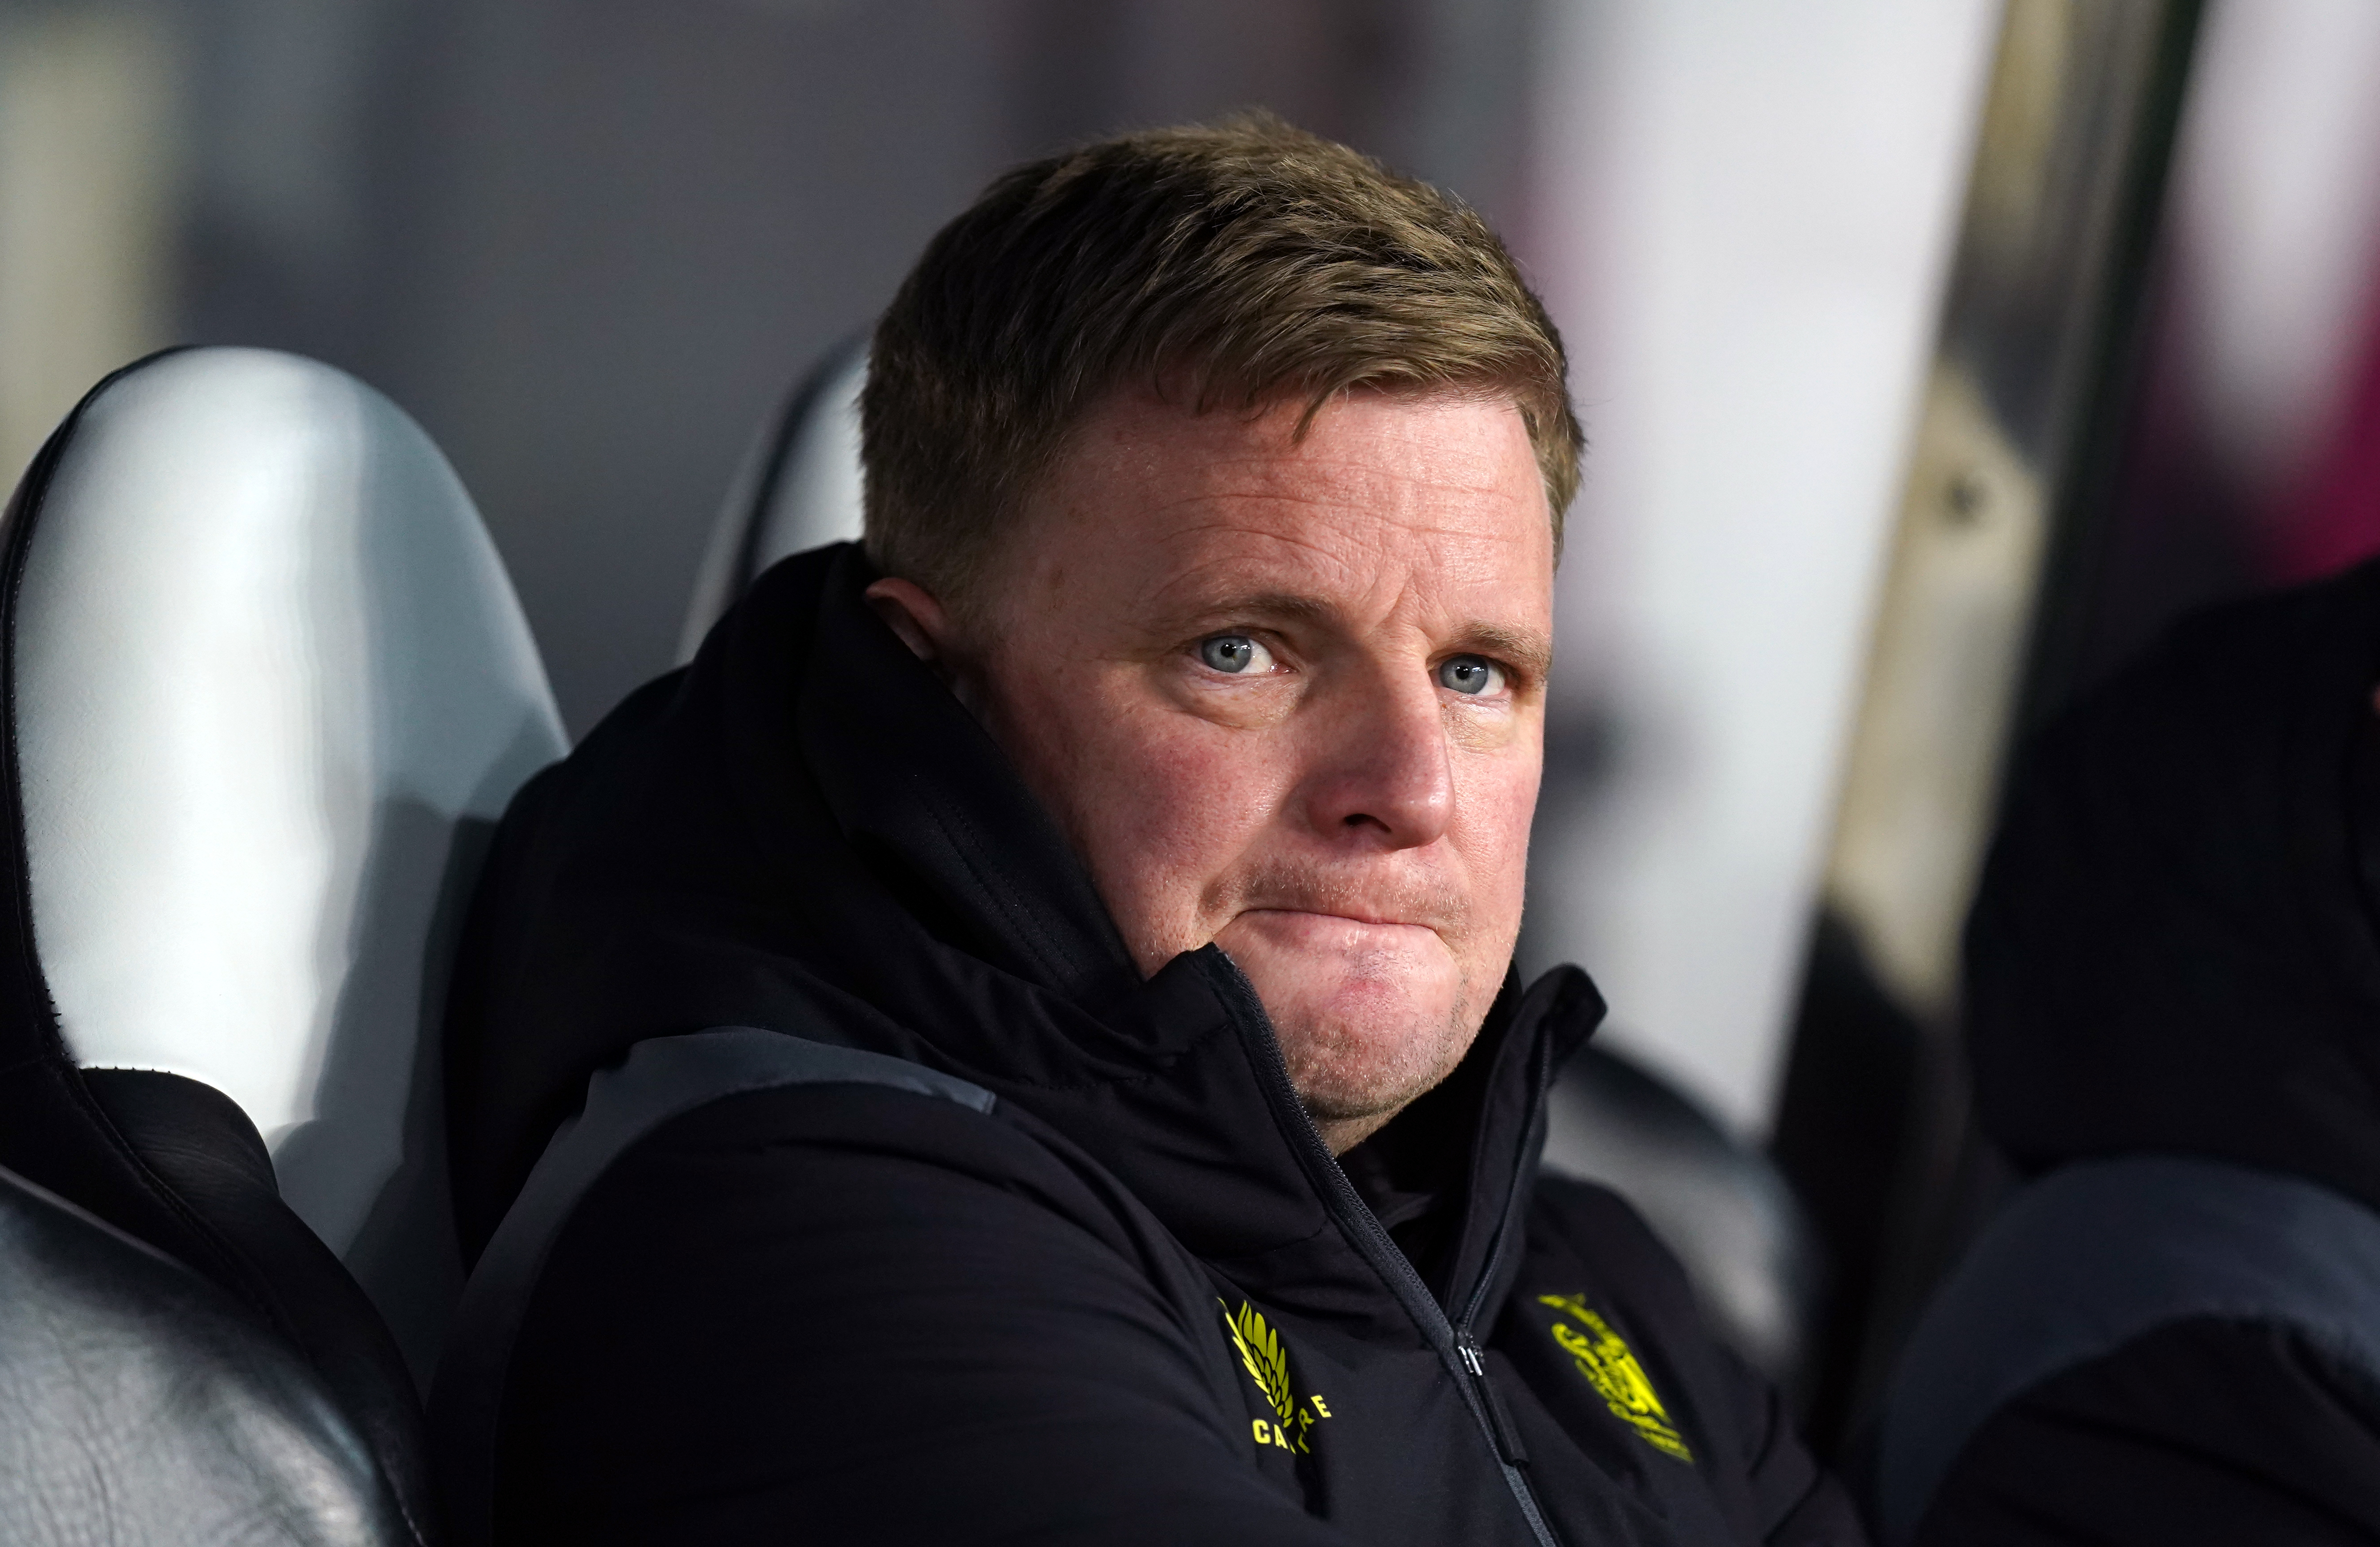 Newcastle head coach Eddie Howe has seen his side lose six of its last seven games in all competitions